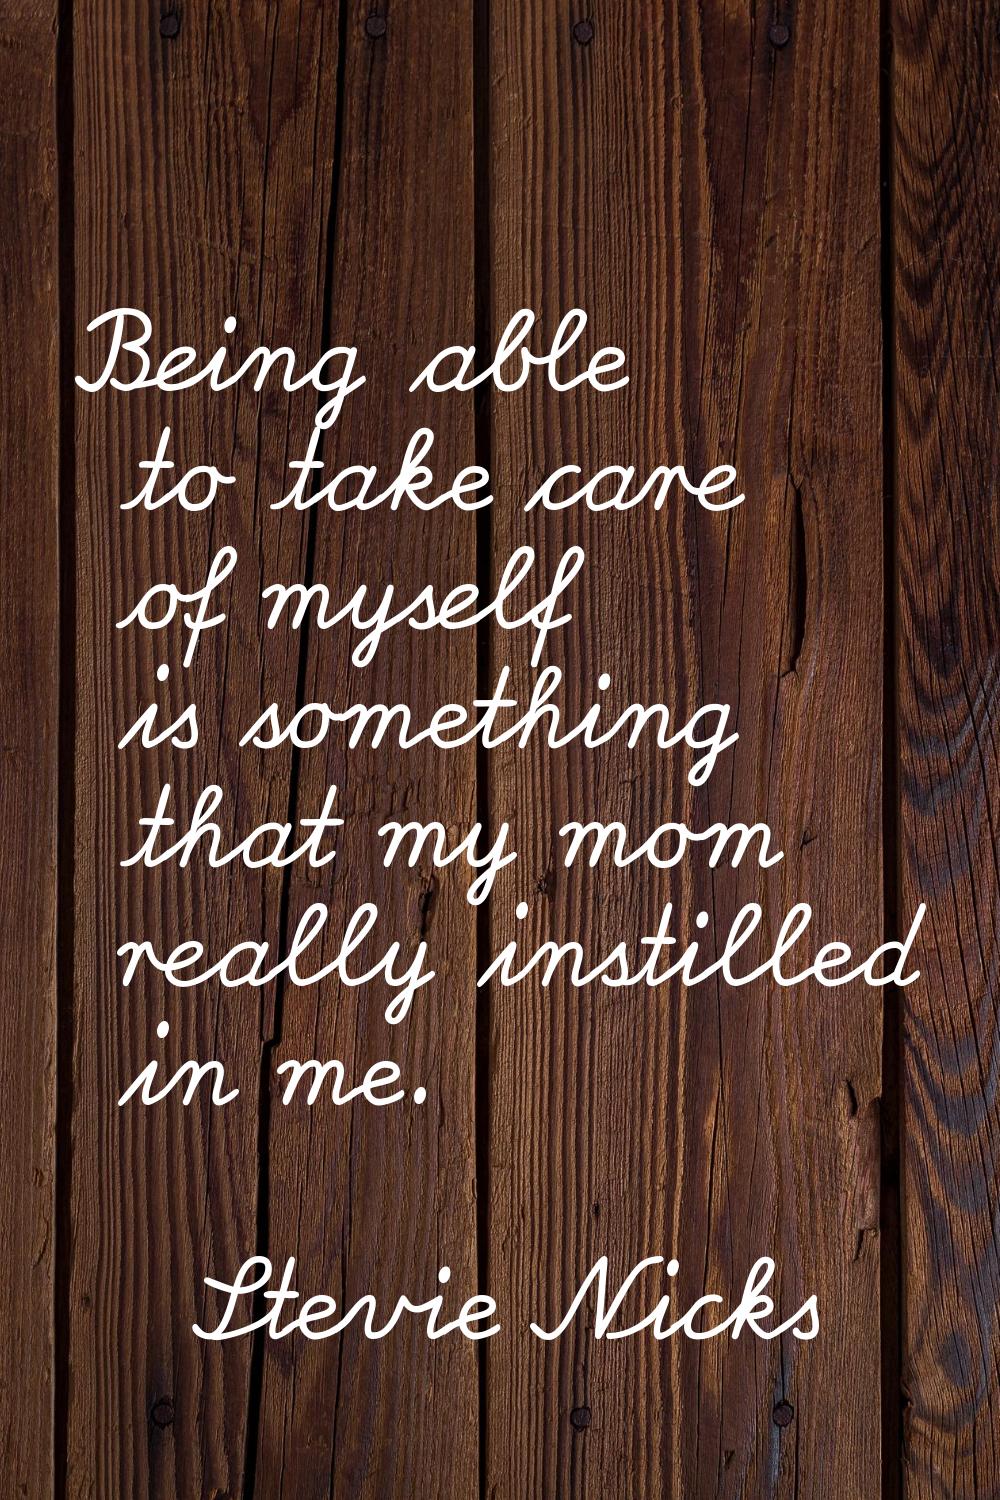 Being able to take care of myself is something that my mom really instilled in me.